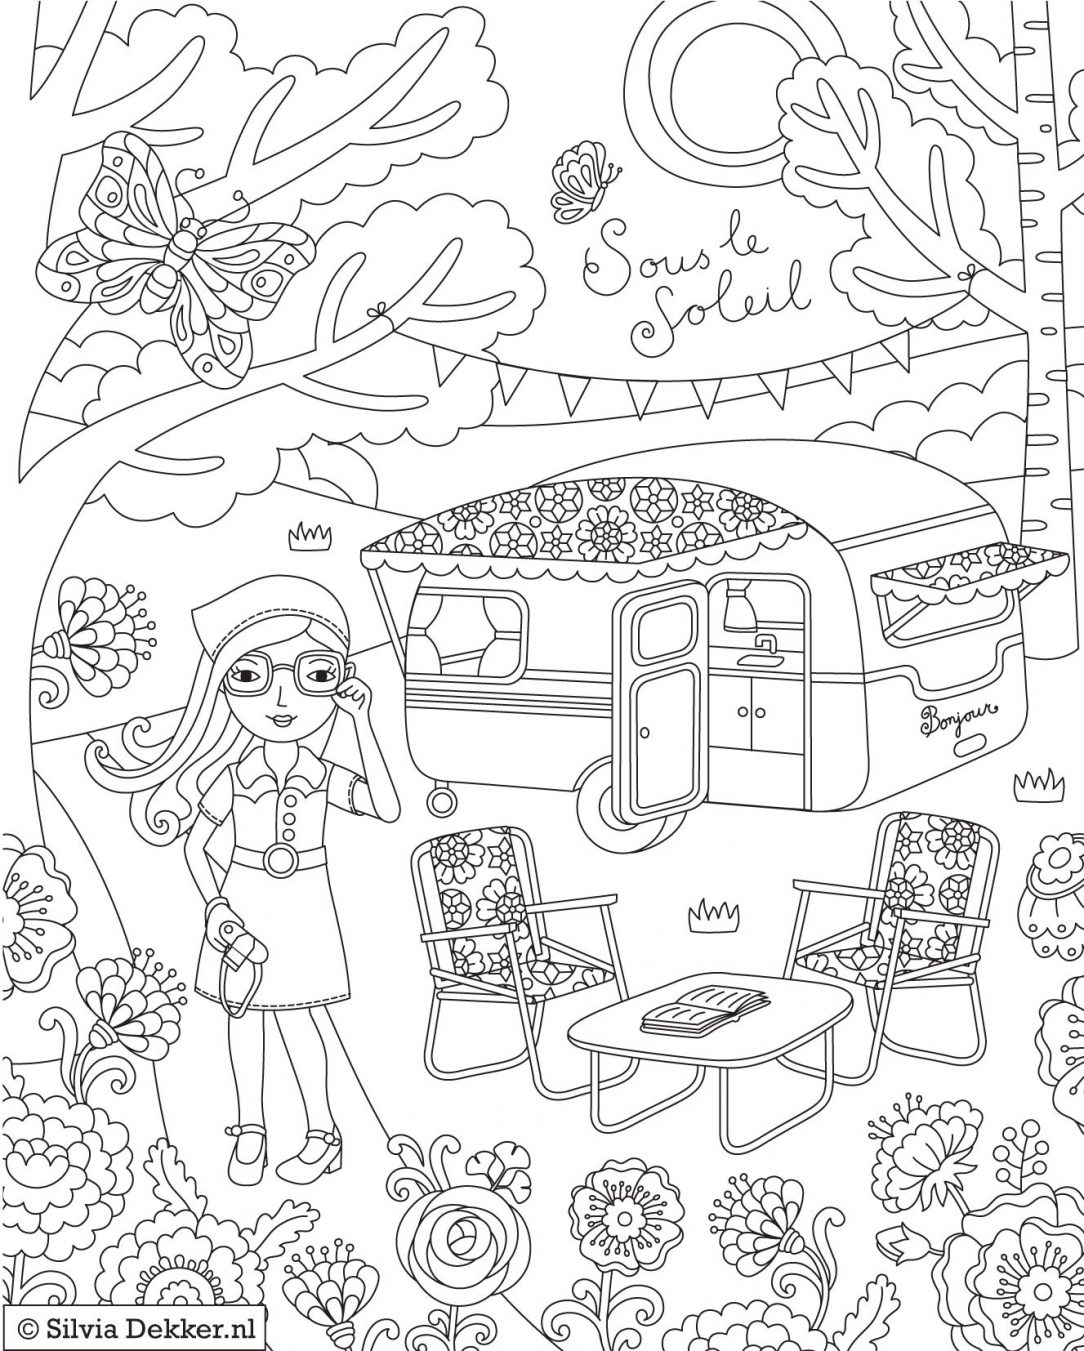 Camping Coloring Pages – coloring.rocks!